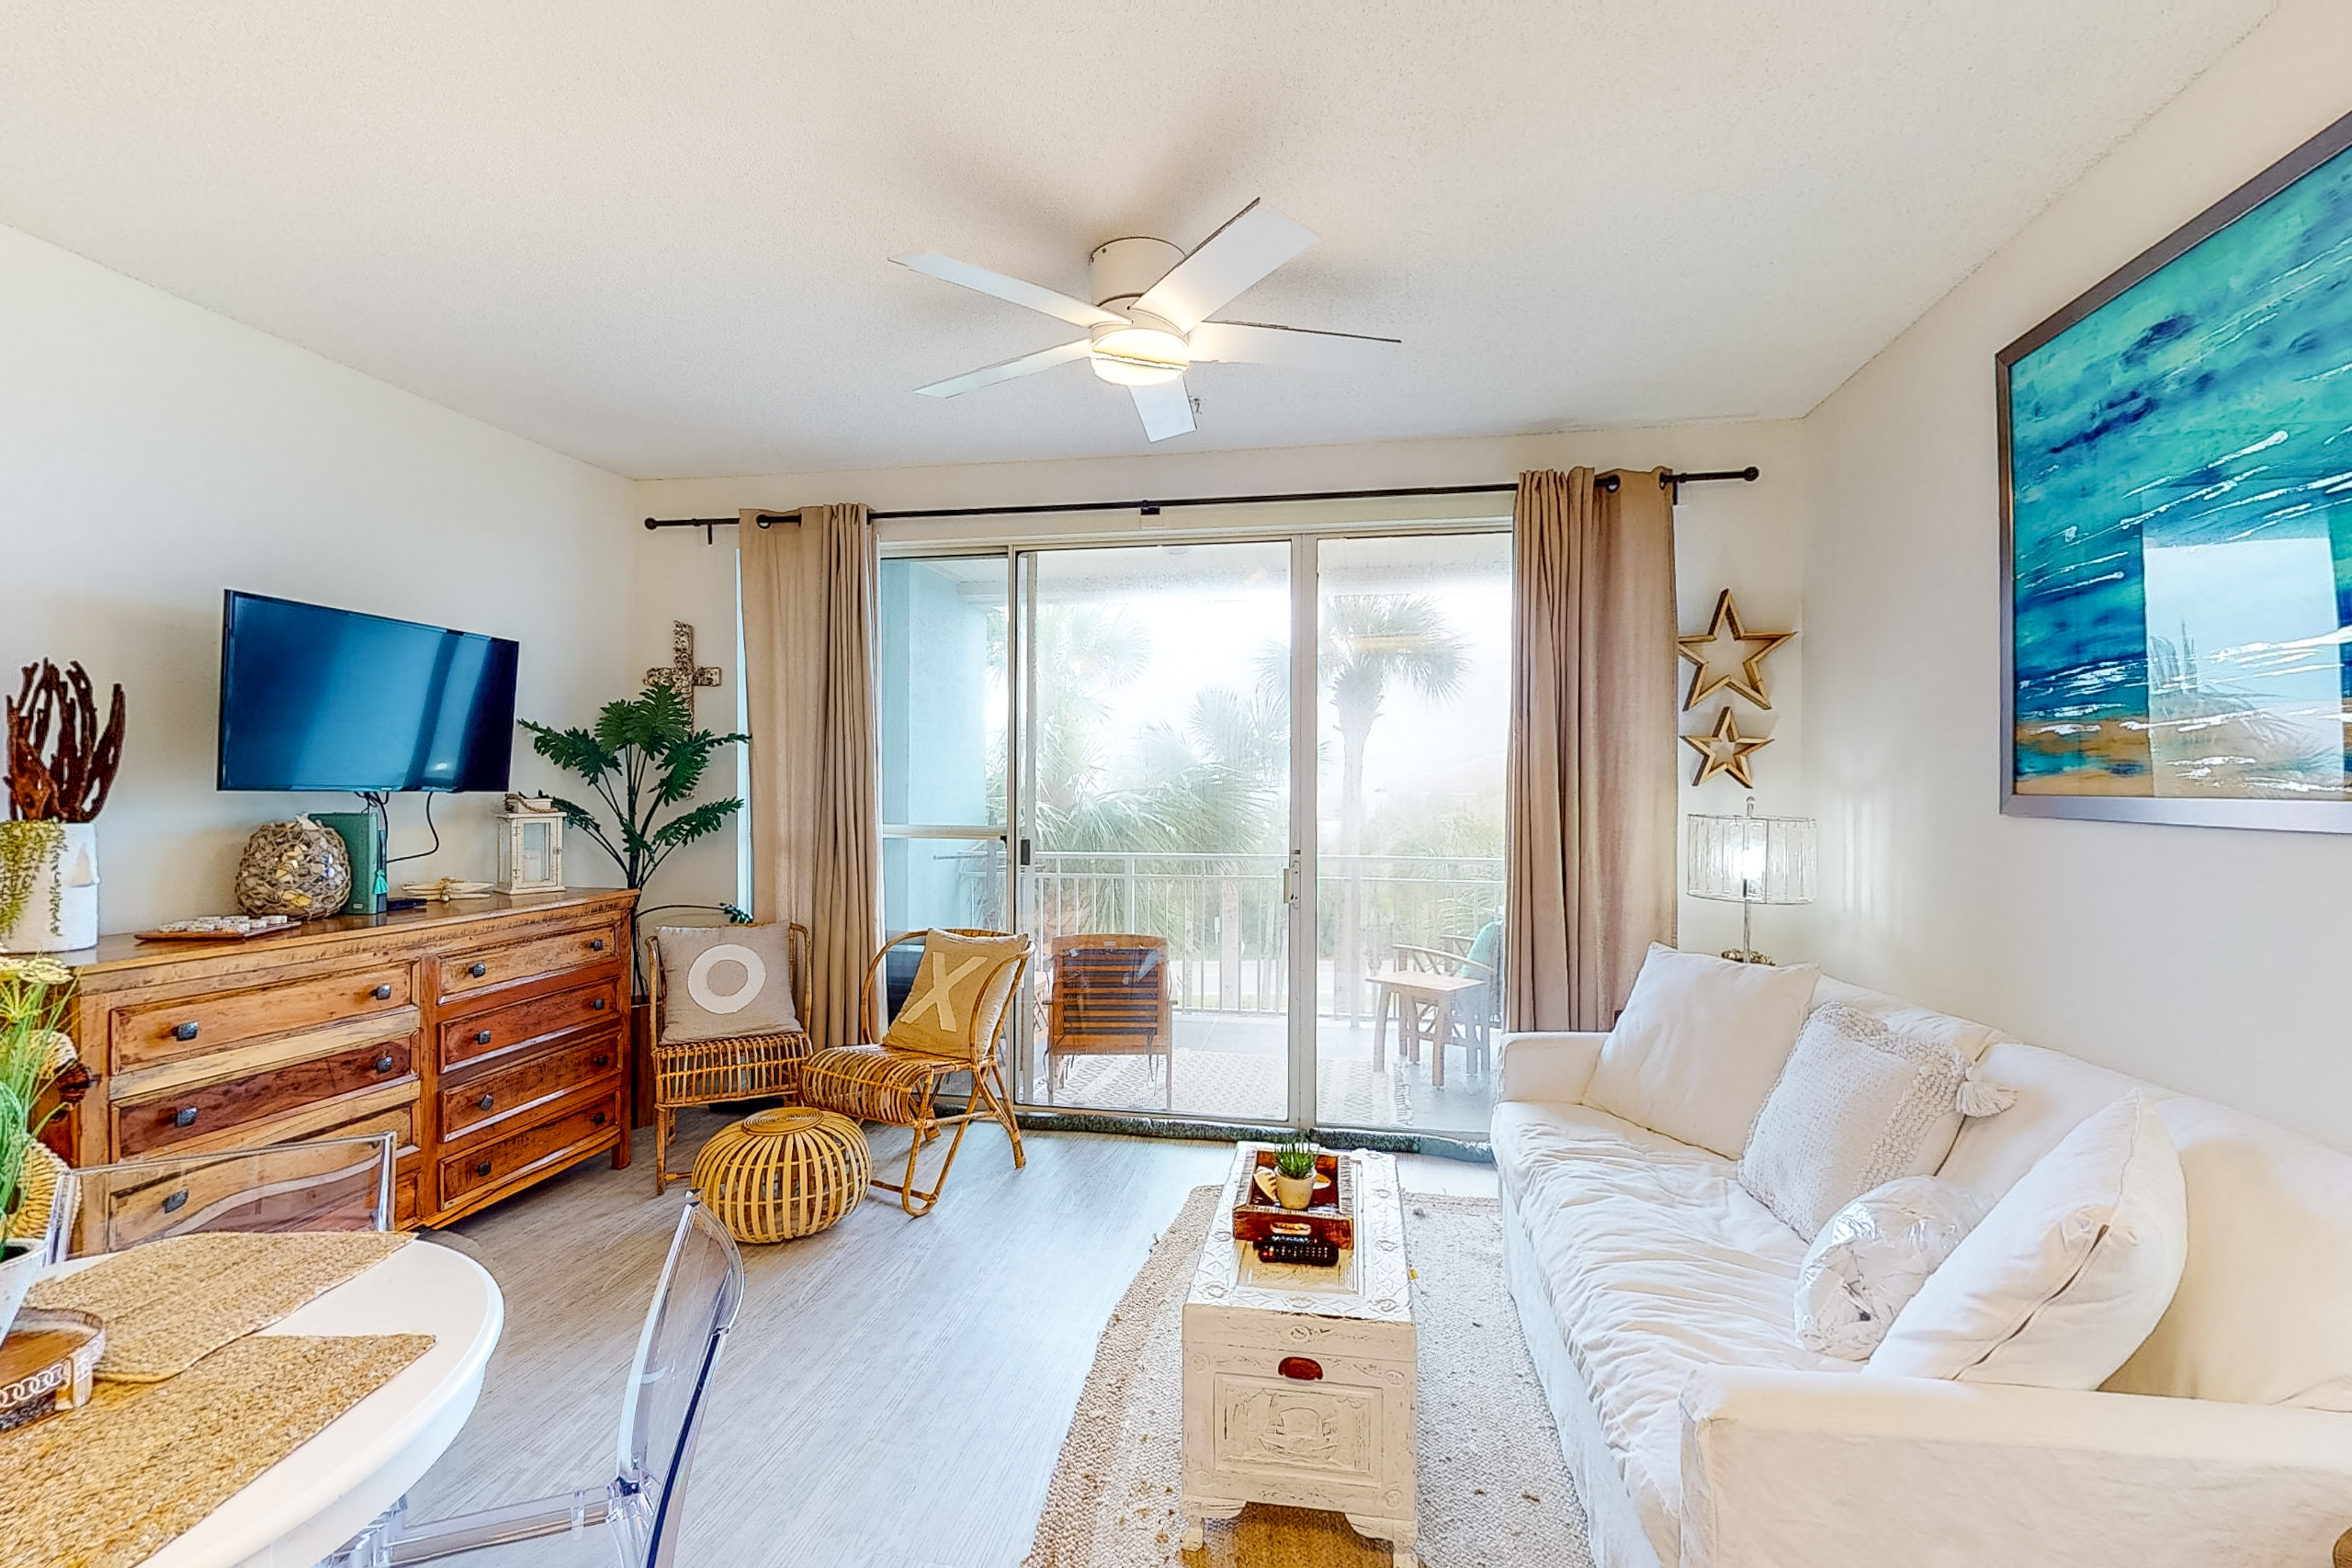 Gulf Place Cabanas 302 Condo rental in Gulf Place Cabanas ~ Santa Rosa Beach Vacation Rentals by BeachGuide 30a in Highway 30-A Florida - #1